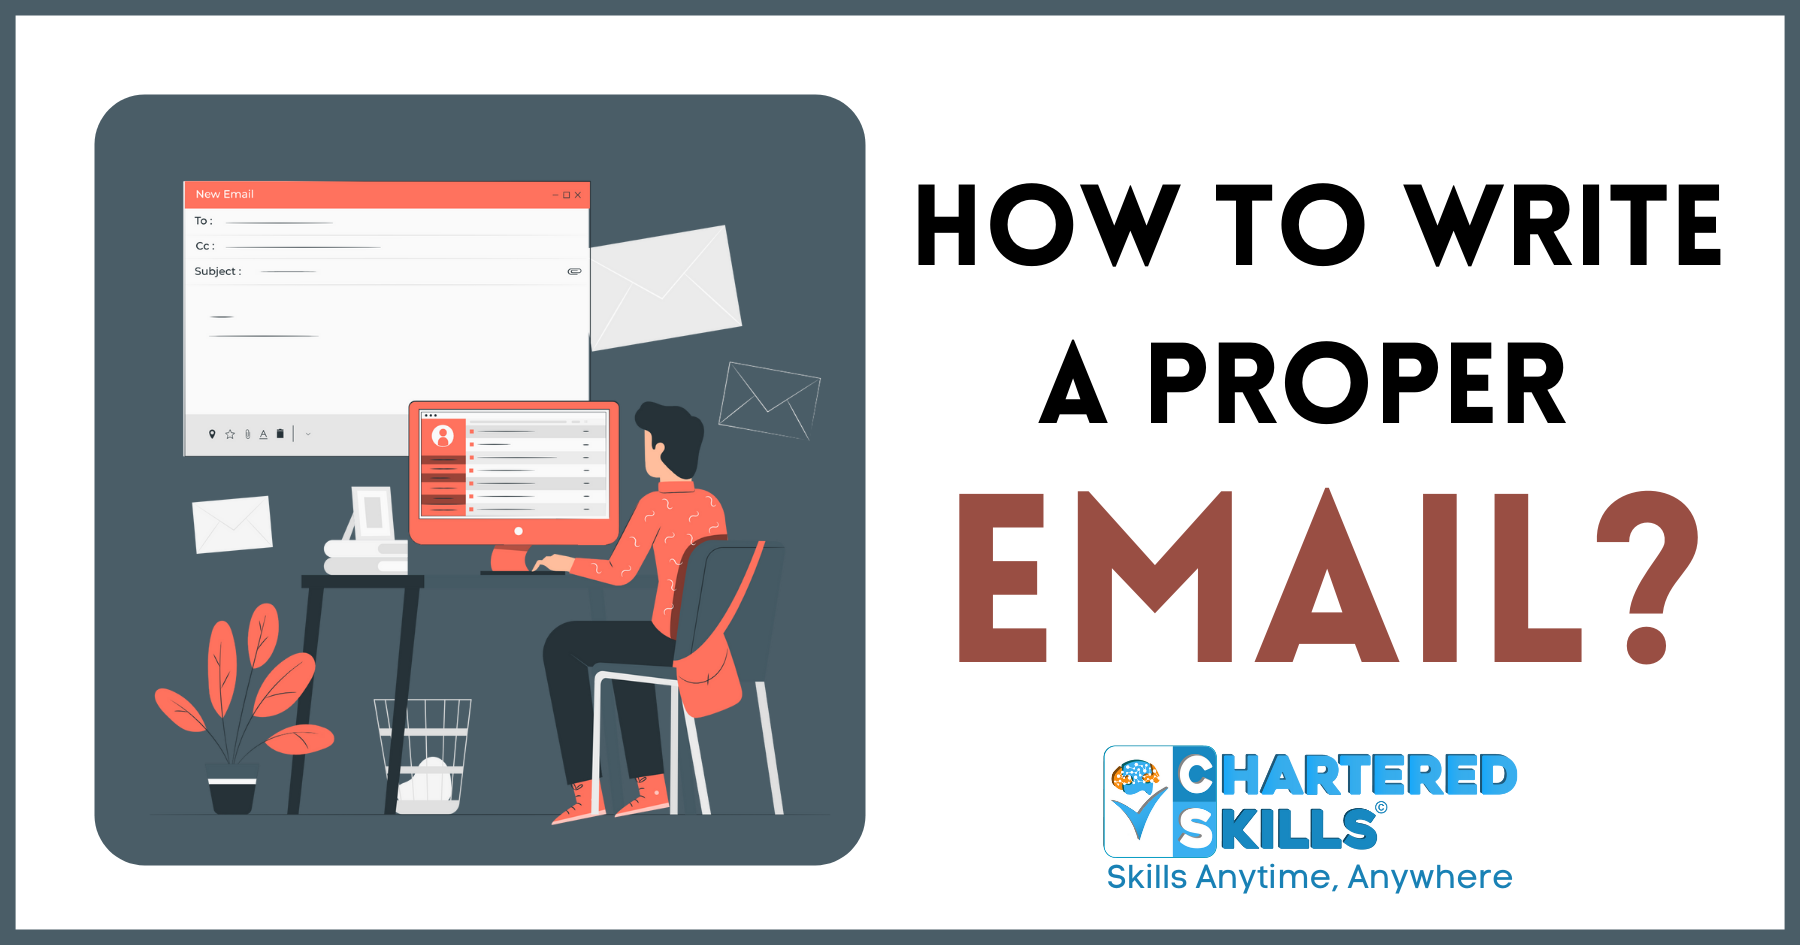 How to write a proper email